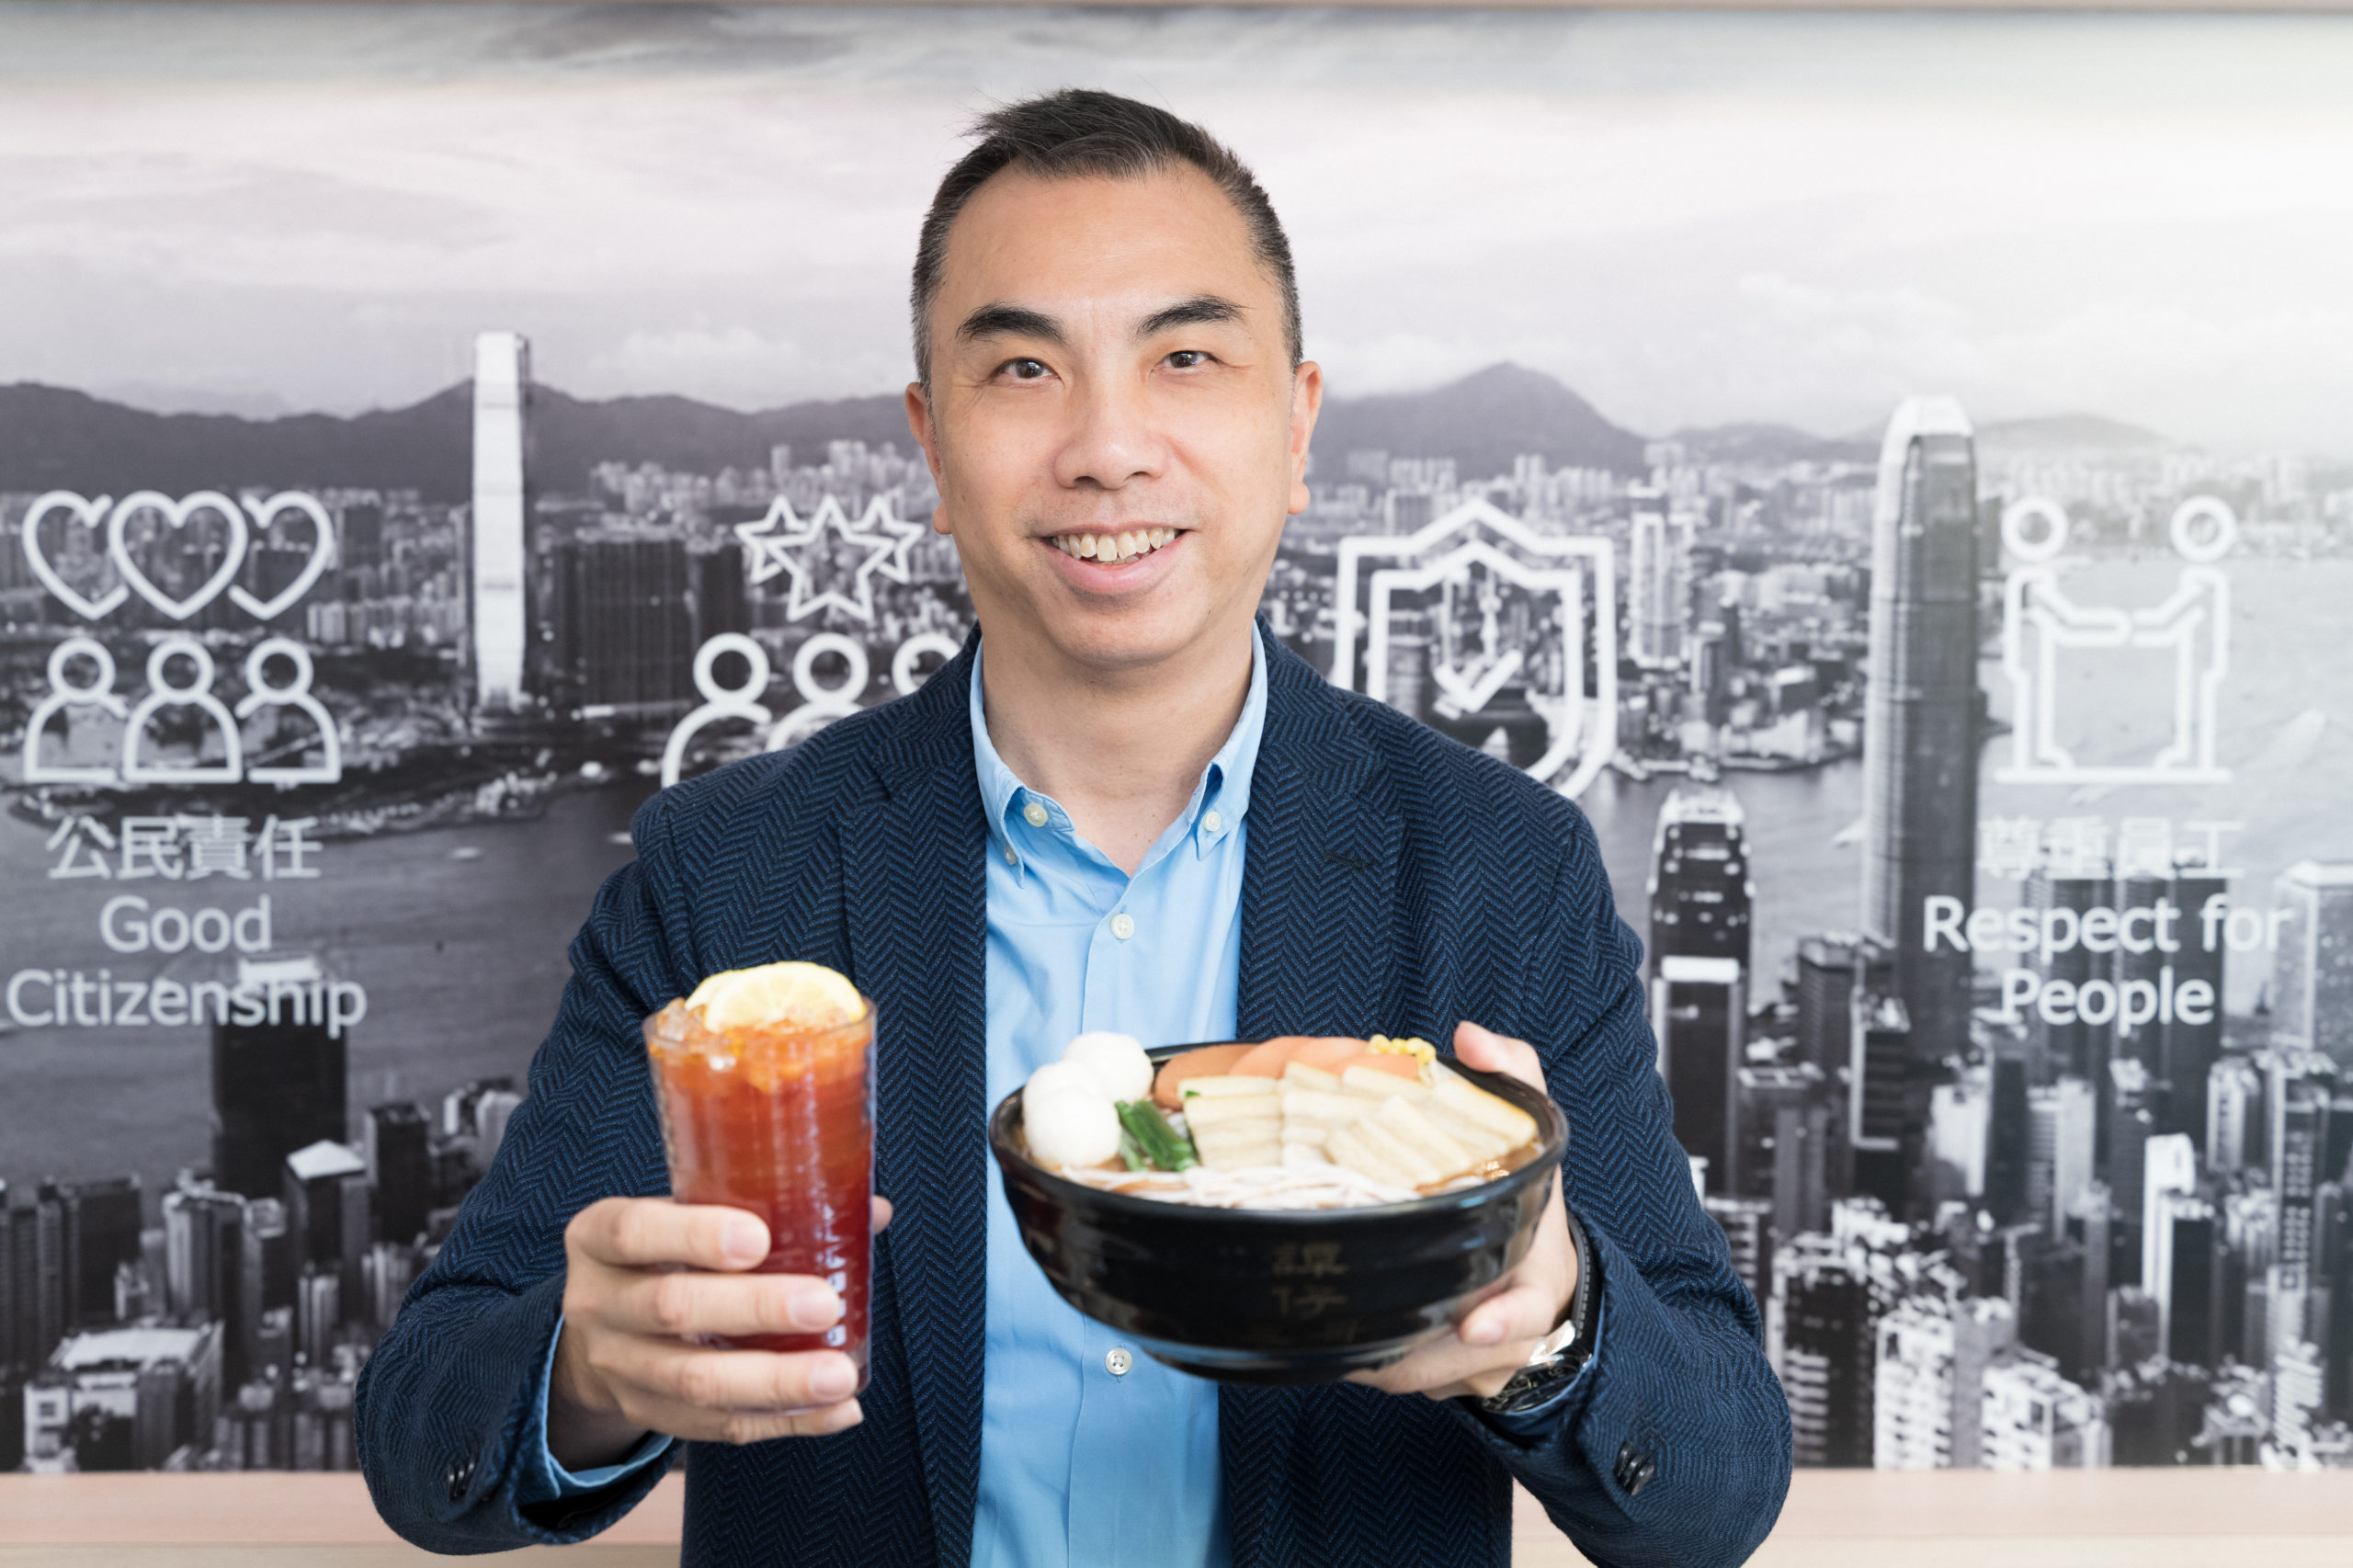 Daren said Tam Jai’s unique style encapsulates the essence of Hong Kong’s “cart noodles” with influences of southwestern Chinese cuisines. This has enabled Tam Jai to build an enviable brand.